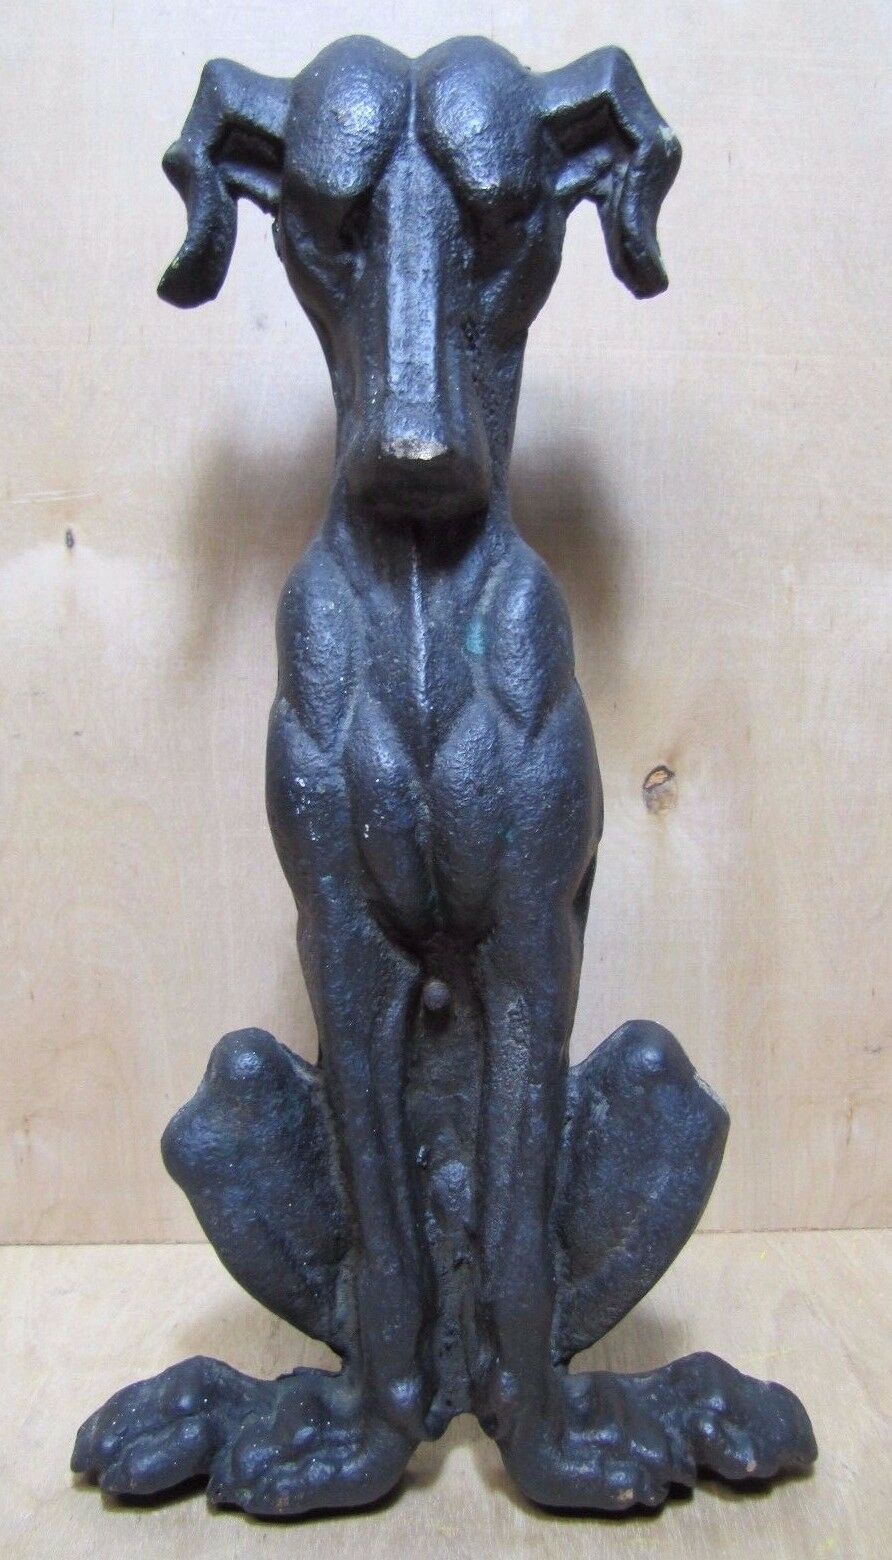 Antique Brass Whippet Dog Doorstop Whimsical Decorative Art Statue Old Make-Do